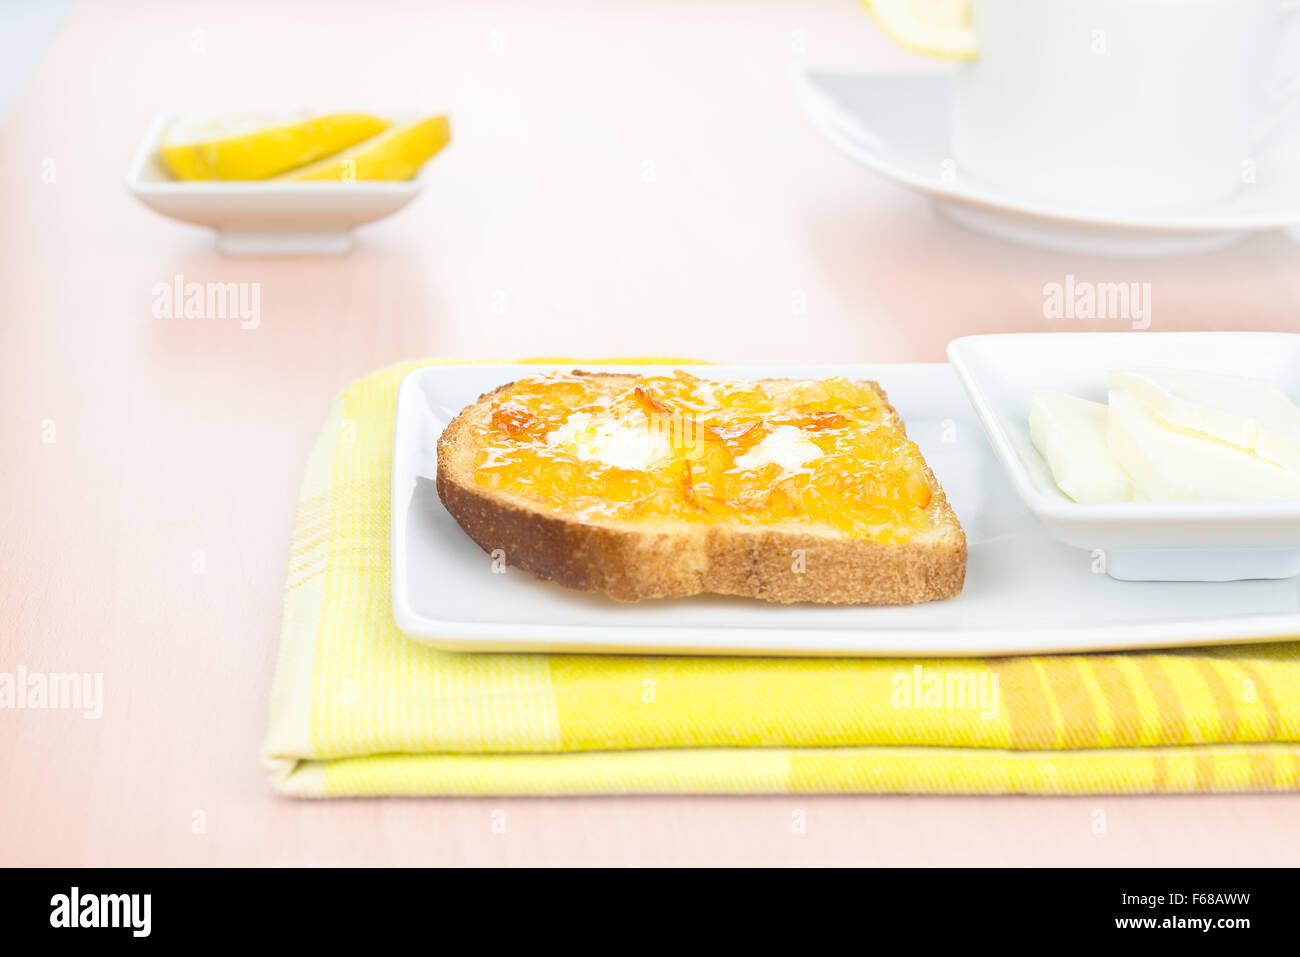 Breakfast. French toast with spread bitter orange marmalade or jam with candied peel, butter curls, lemon, a cup and dishware on Stock Photo